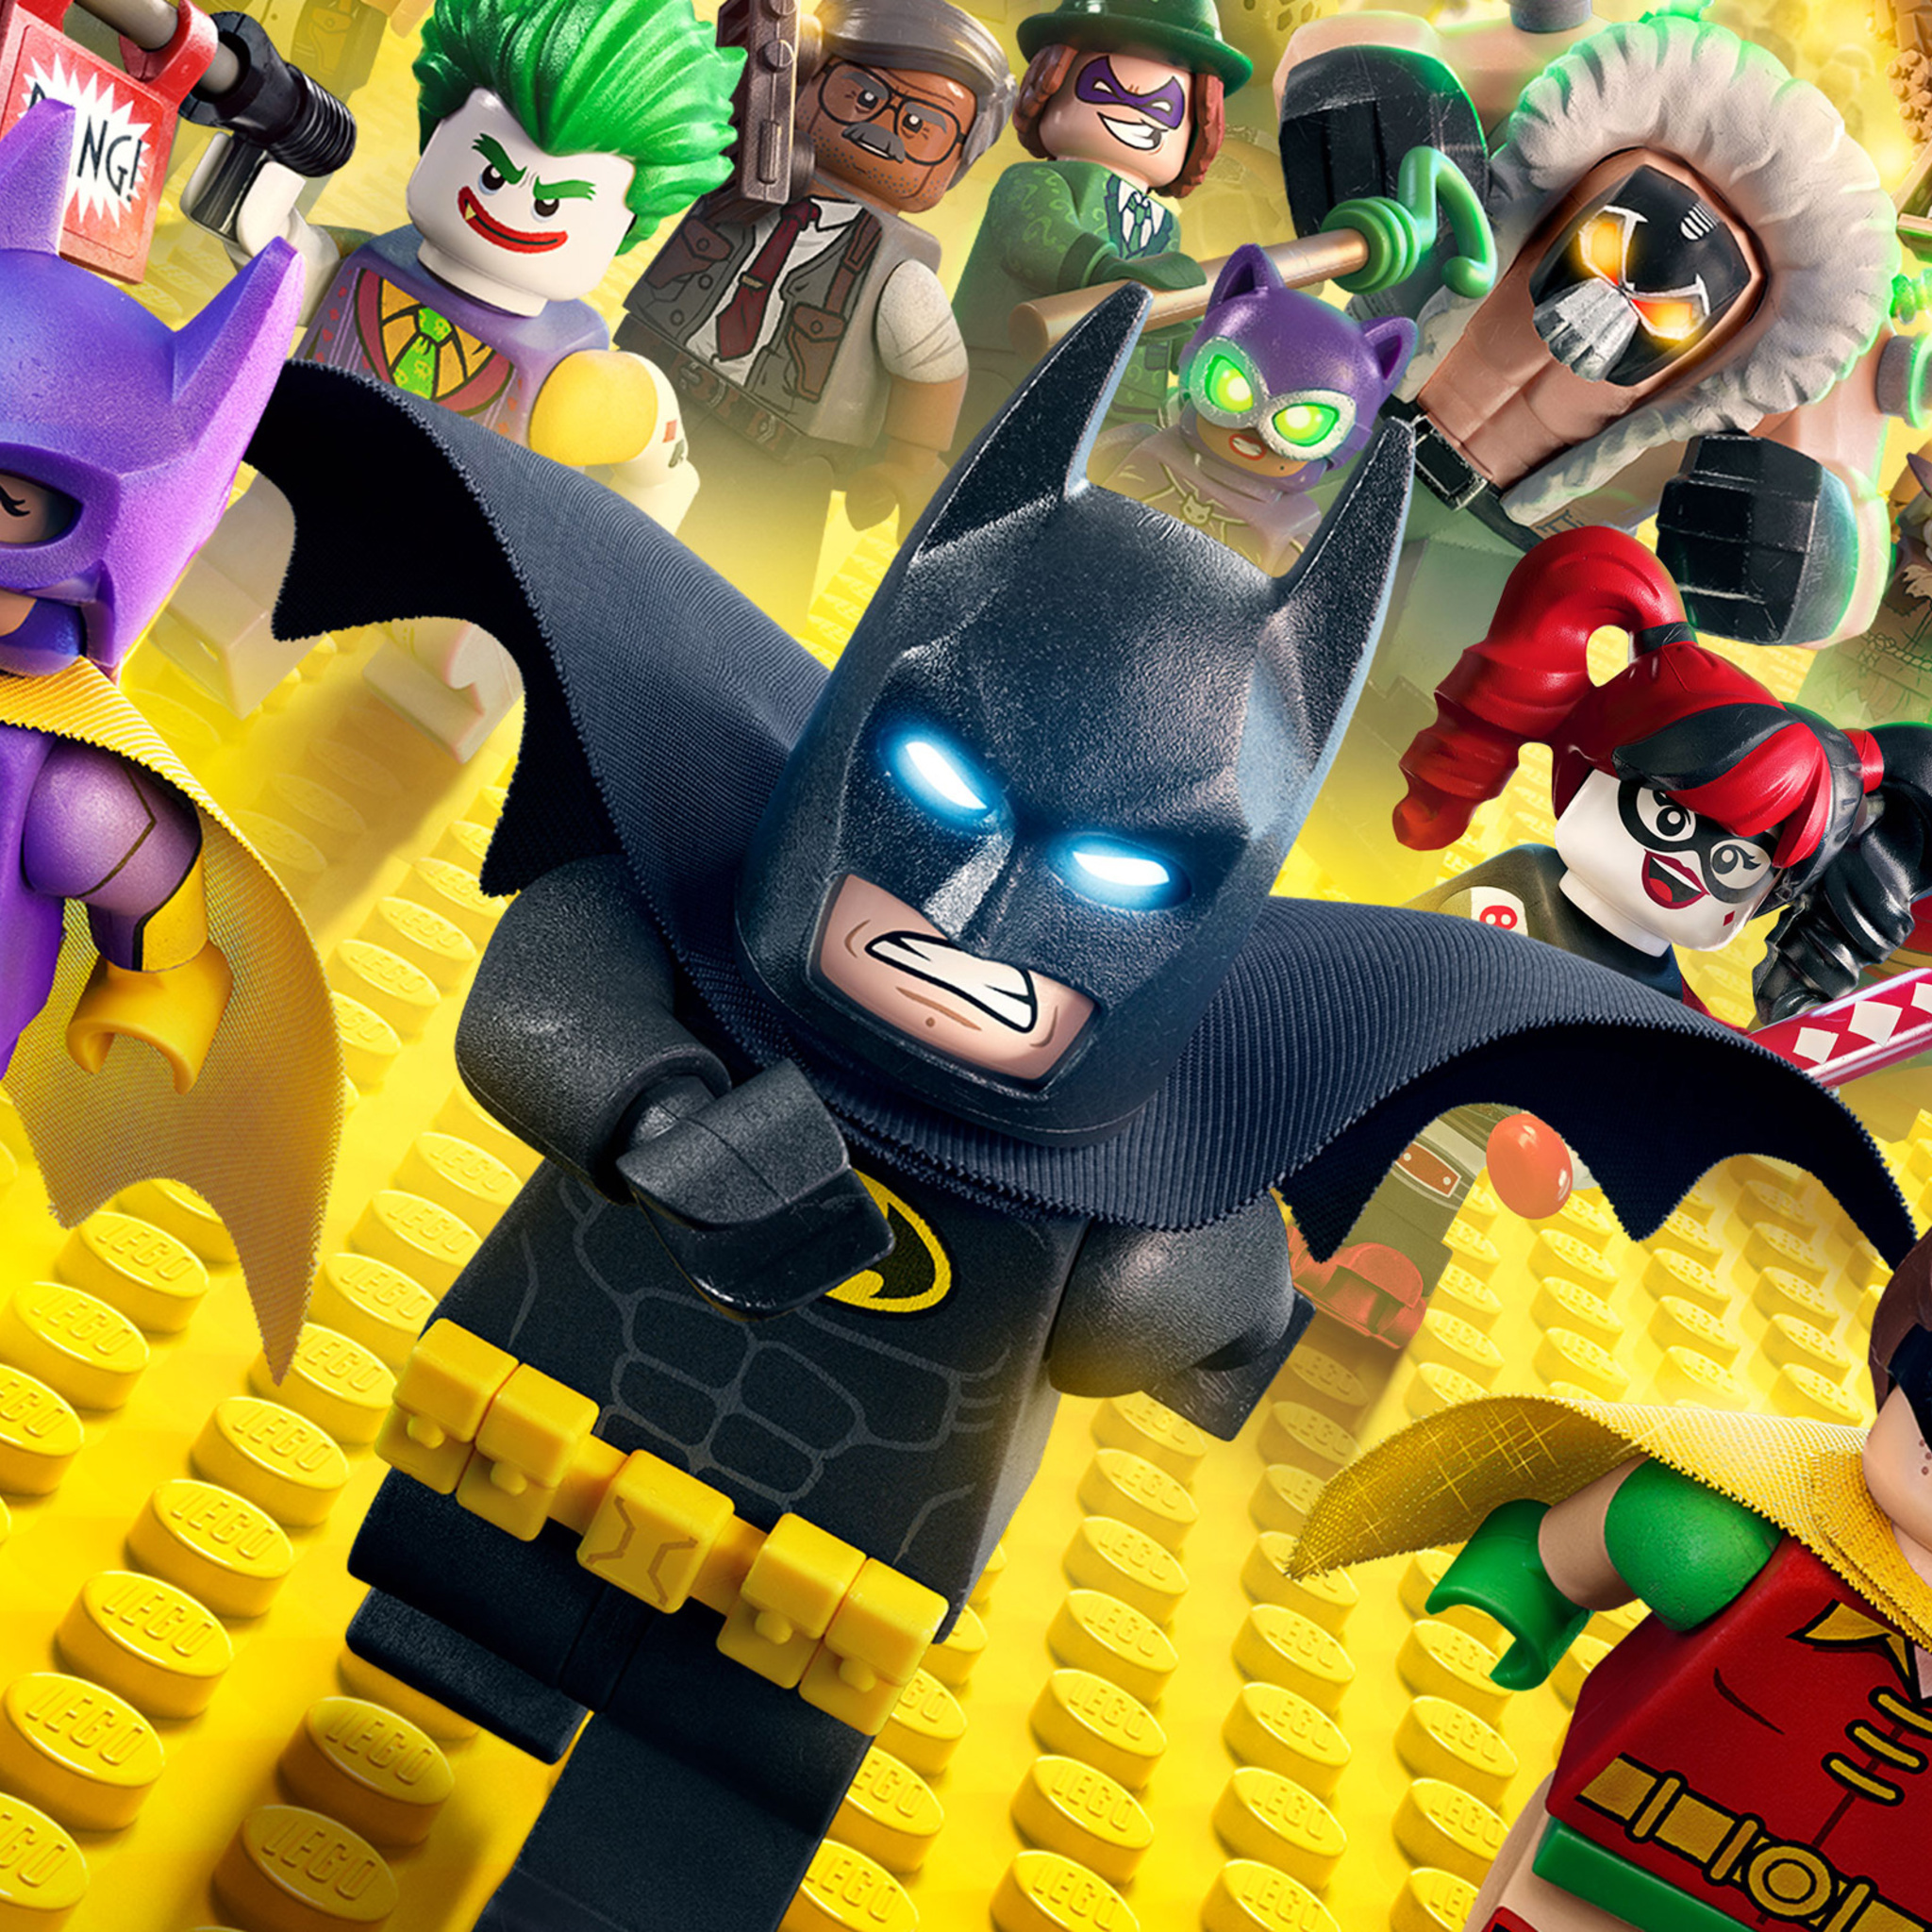 Lego Batman Movie on iPad Air, HD 4K wallpapers, Stunning visuals, Perfect for Apple devices, 2050x2050 HD Handy